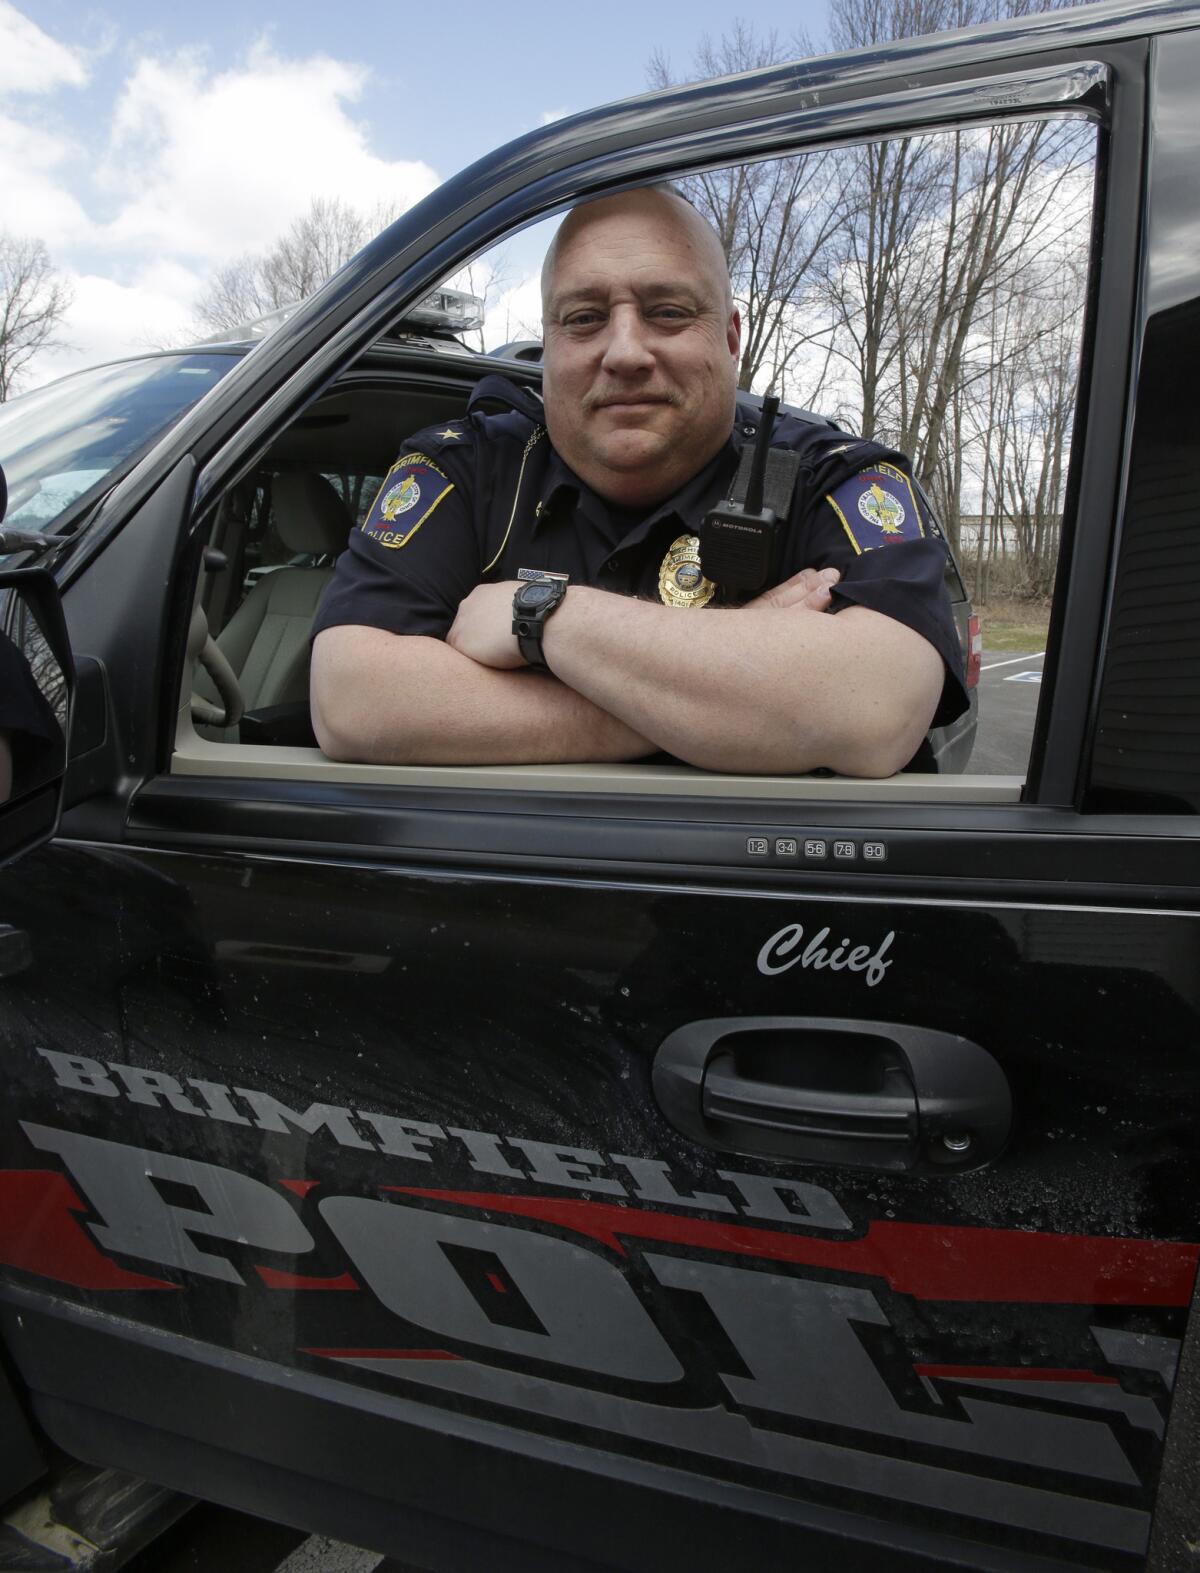 Brimfield Police Chief David Oliver uses the reach of his department's increasingly popular Facebook page to interact with residents and take to task criminals and other ne'er-do-wells in messages that mix humor and blunt opinion.